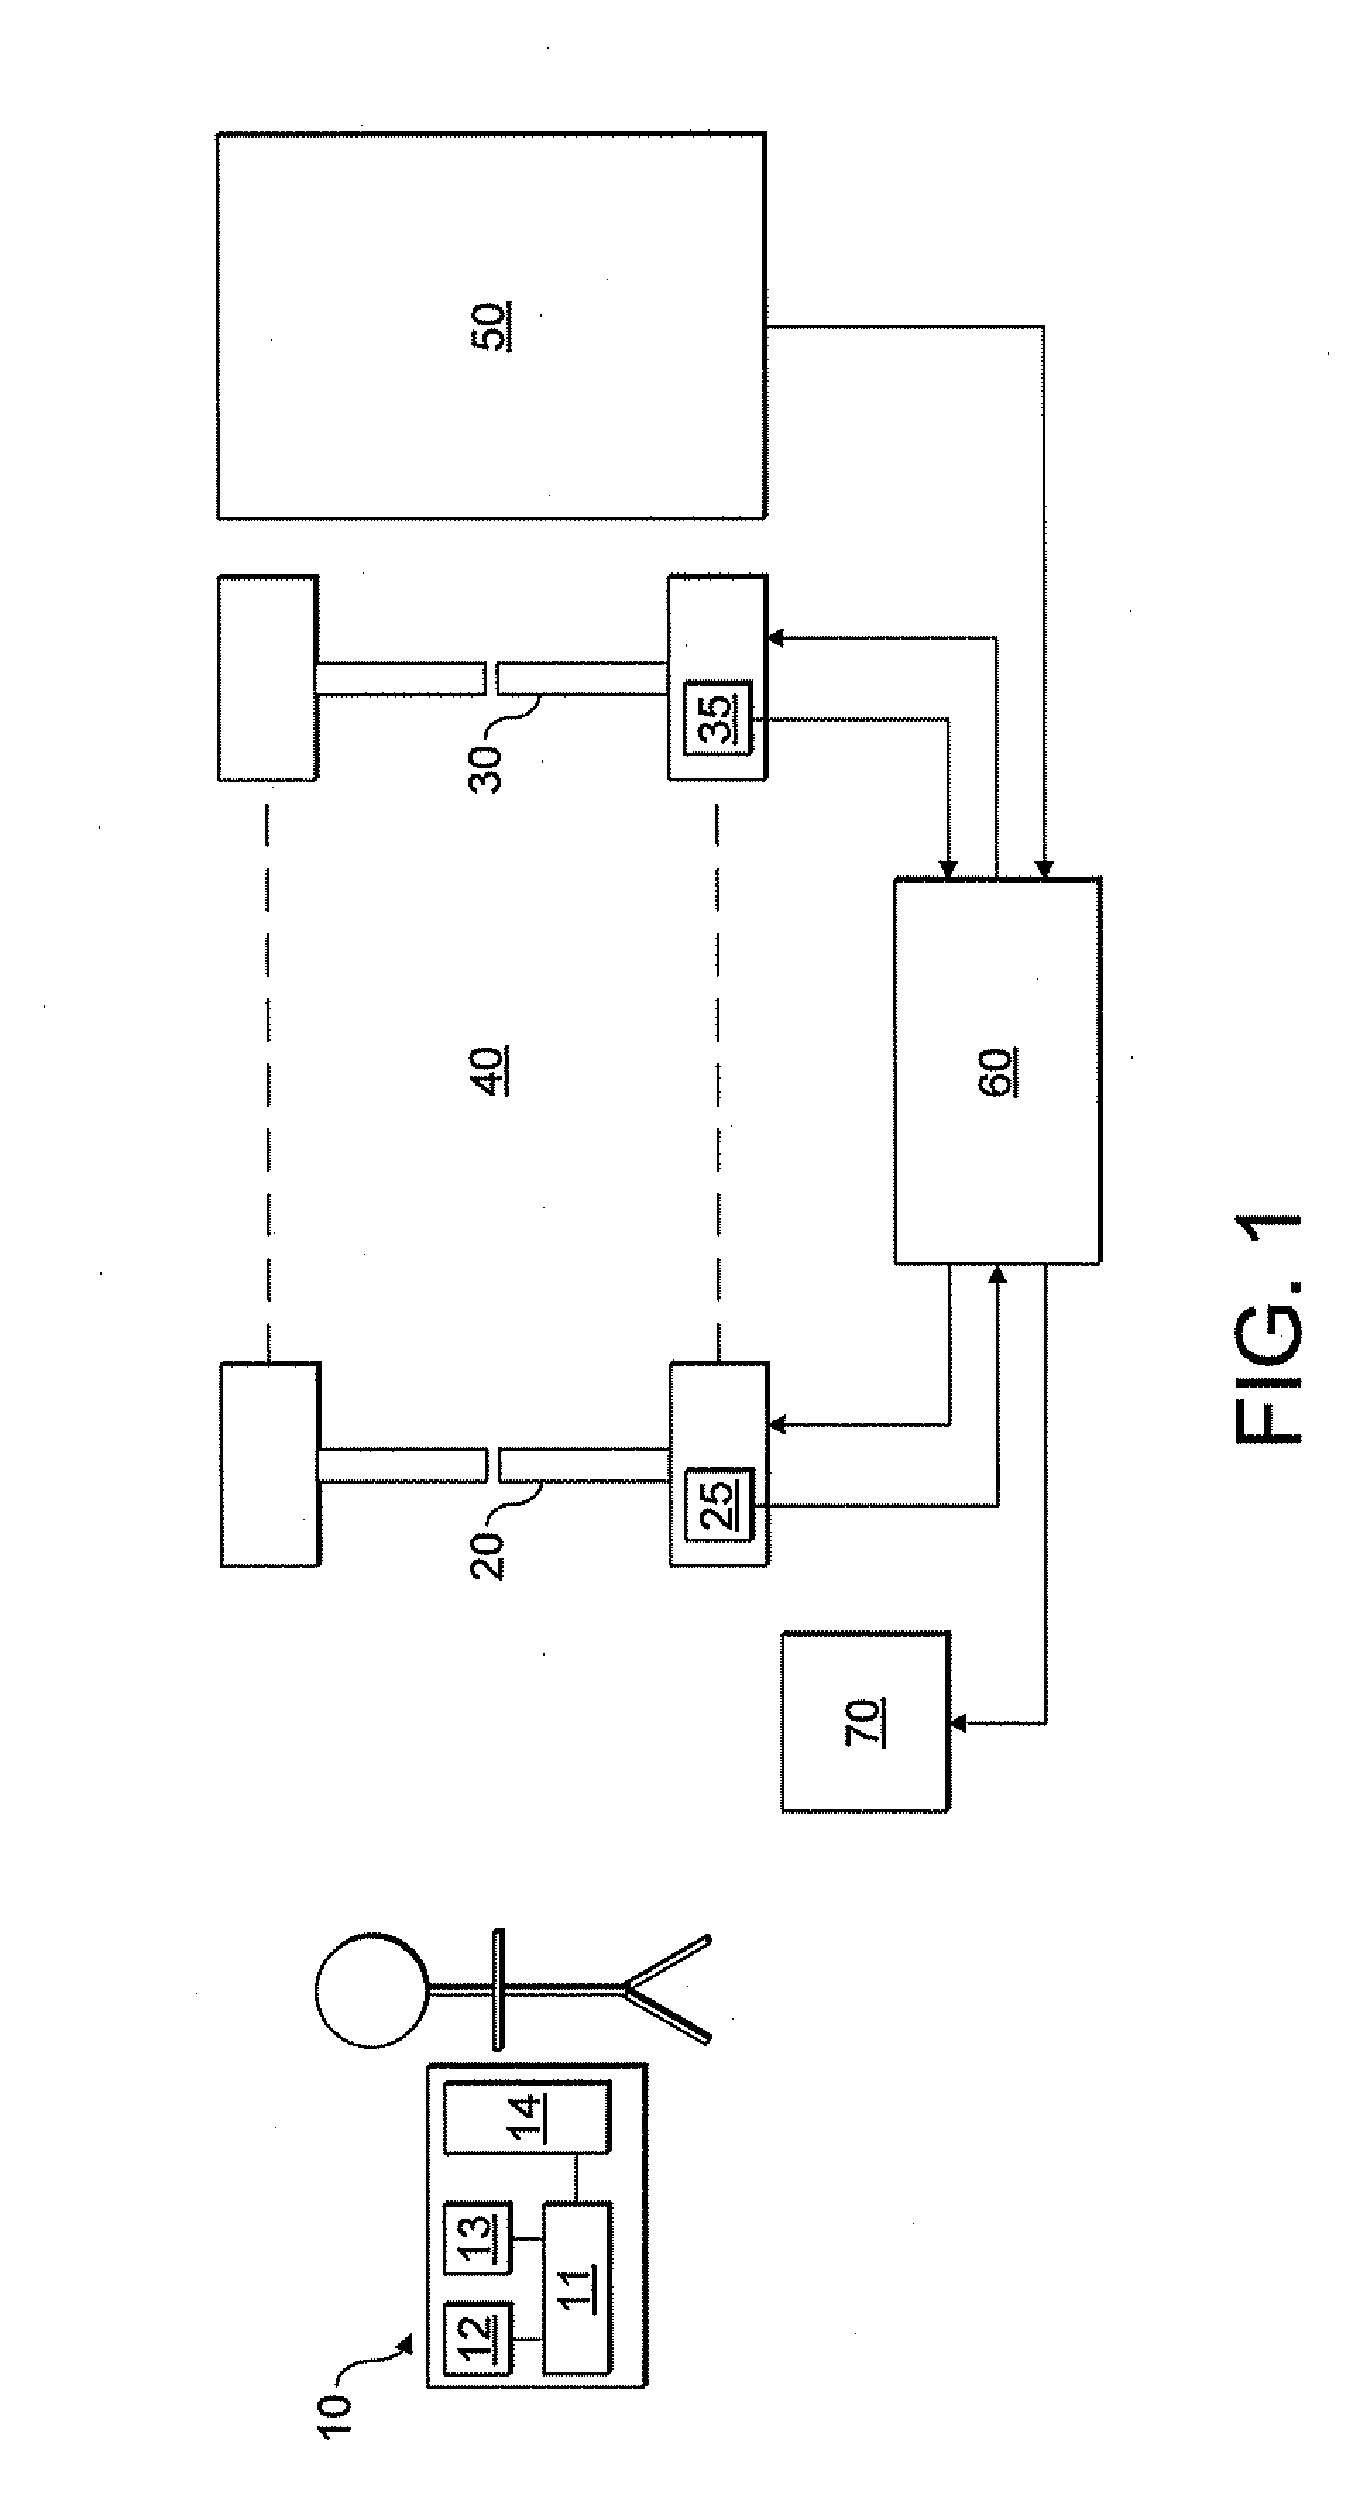 System for regulating access to a resource